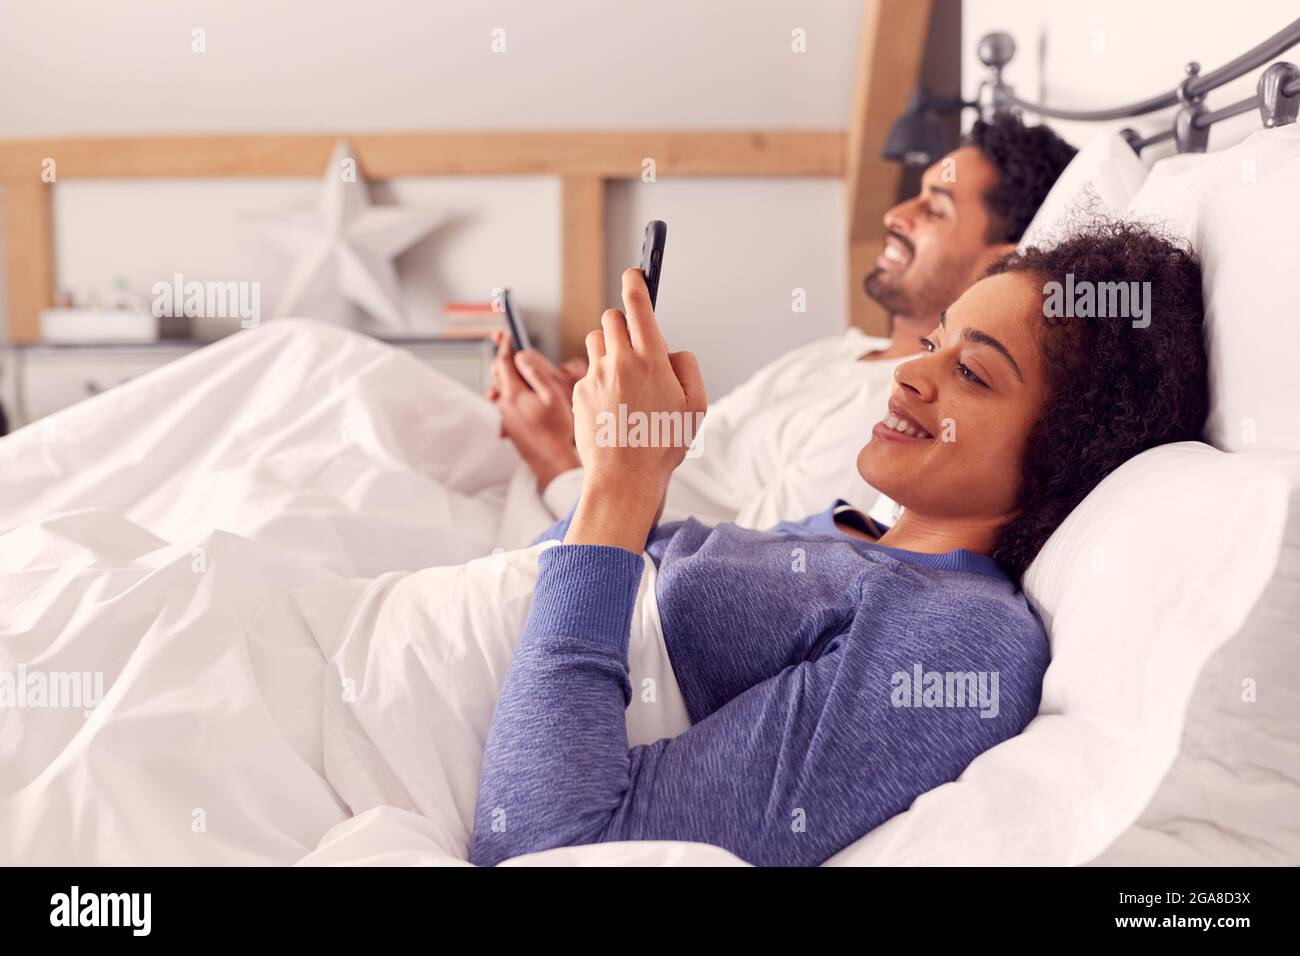 Couple In Wearing Pyjamas Lying In Bed Looking At Mobile Phones Together Stock Photo